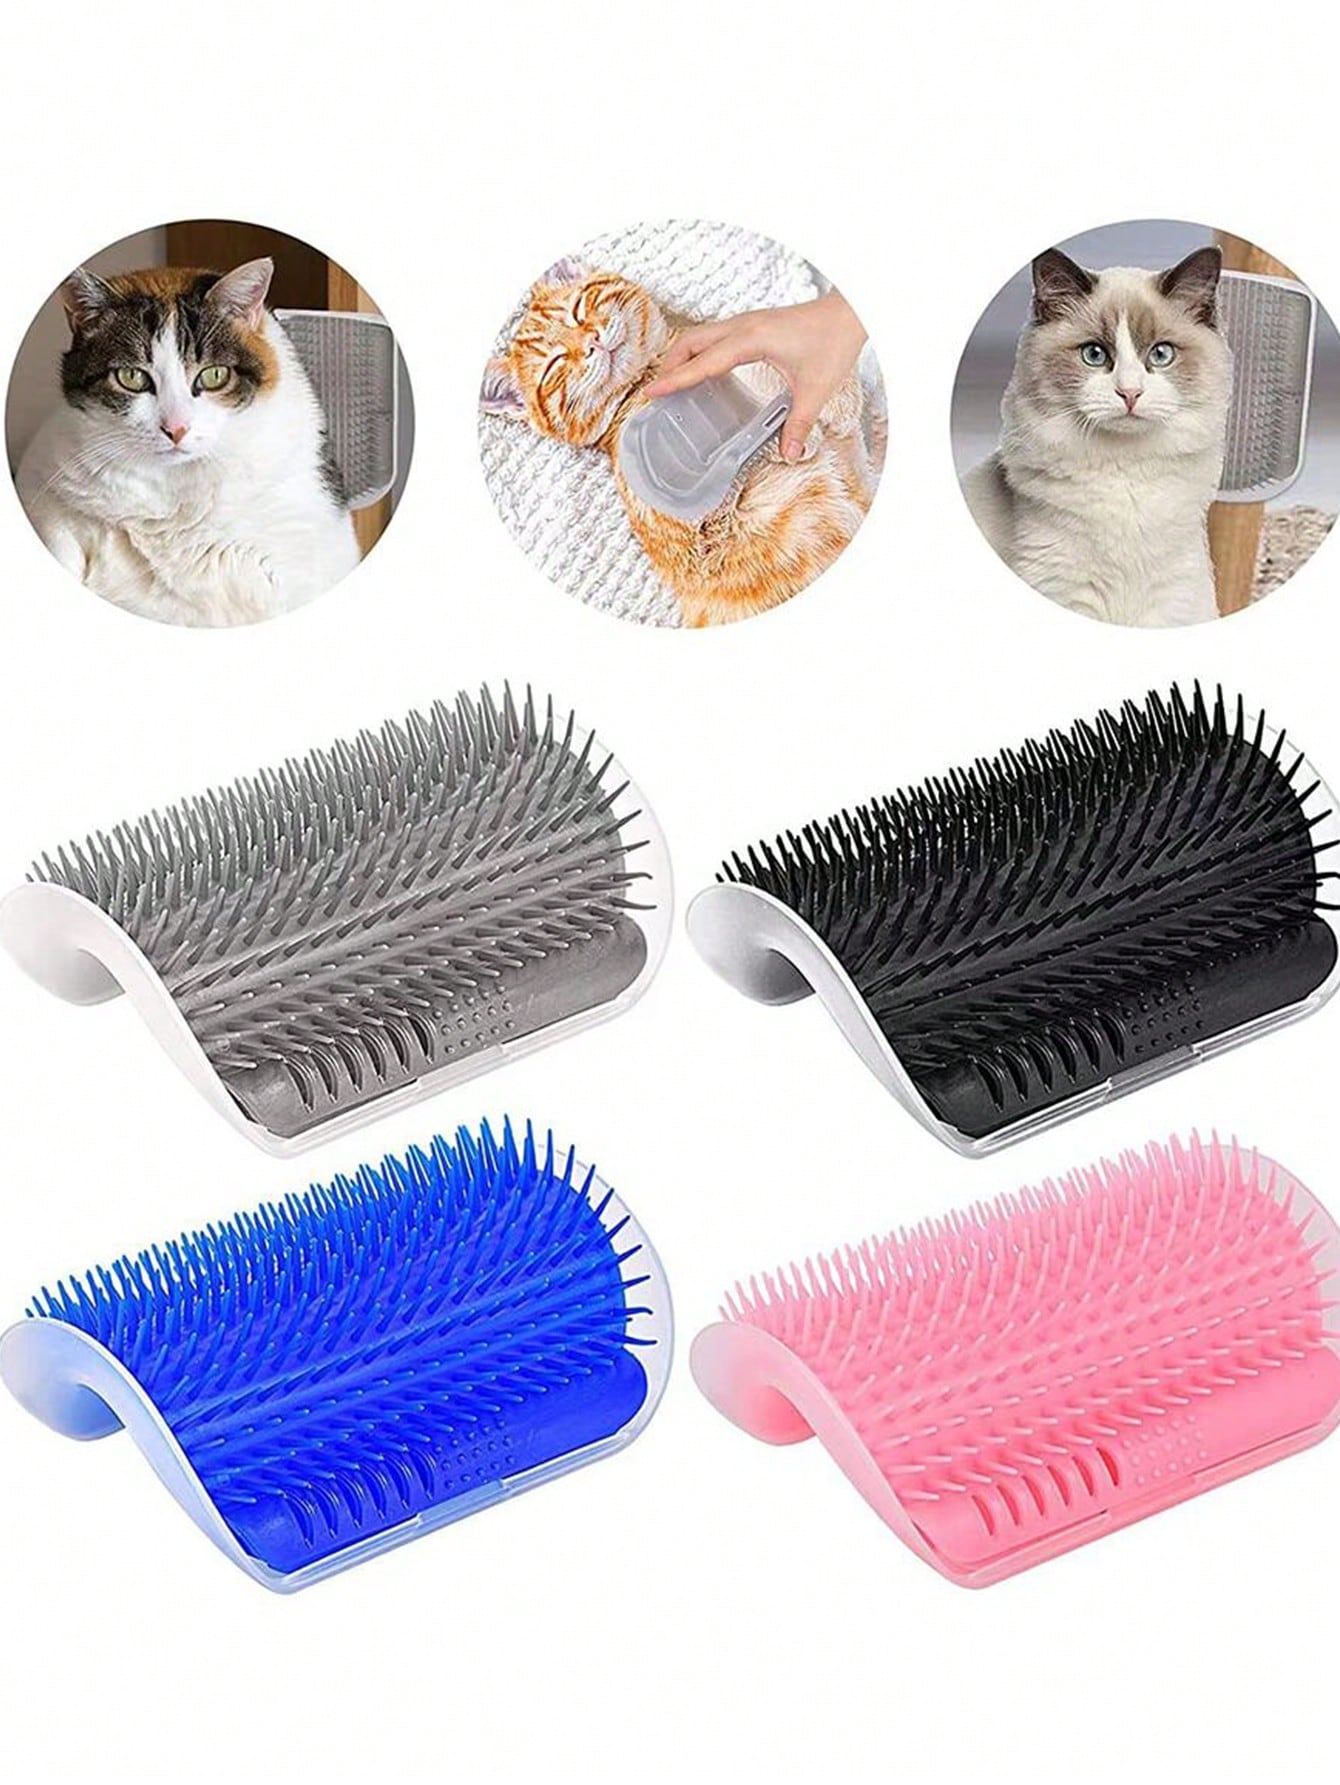 1pc Random Color Pet Cat Self-groomer Toy With Scratching Pad & Catnip Dispenser, Wall-mounted